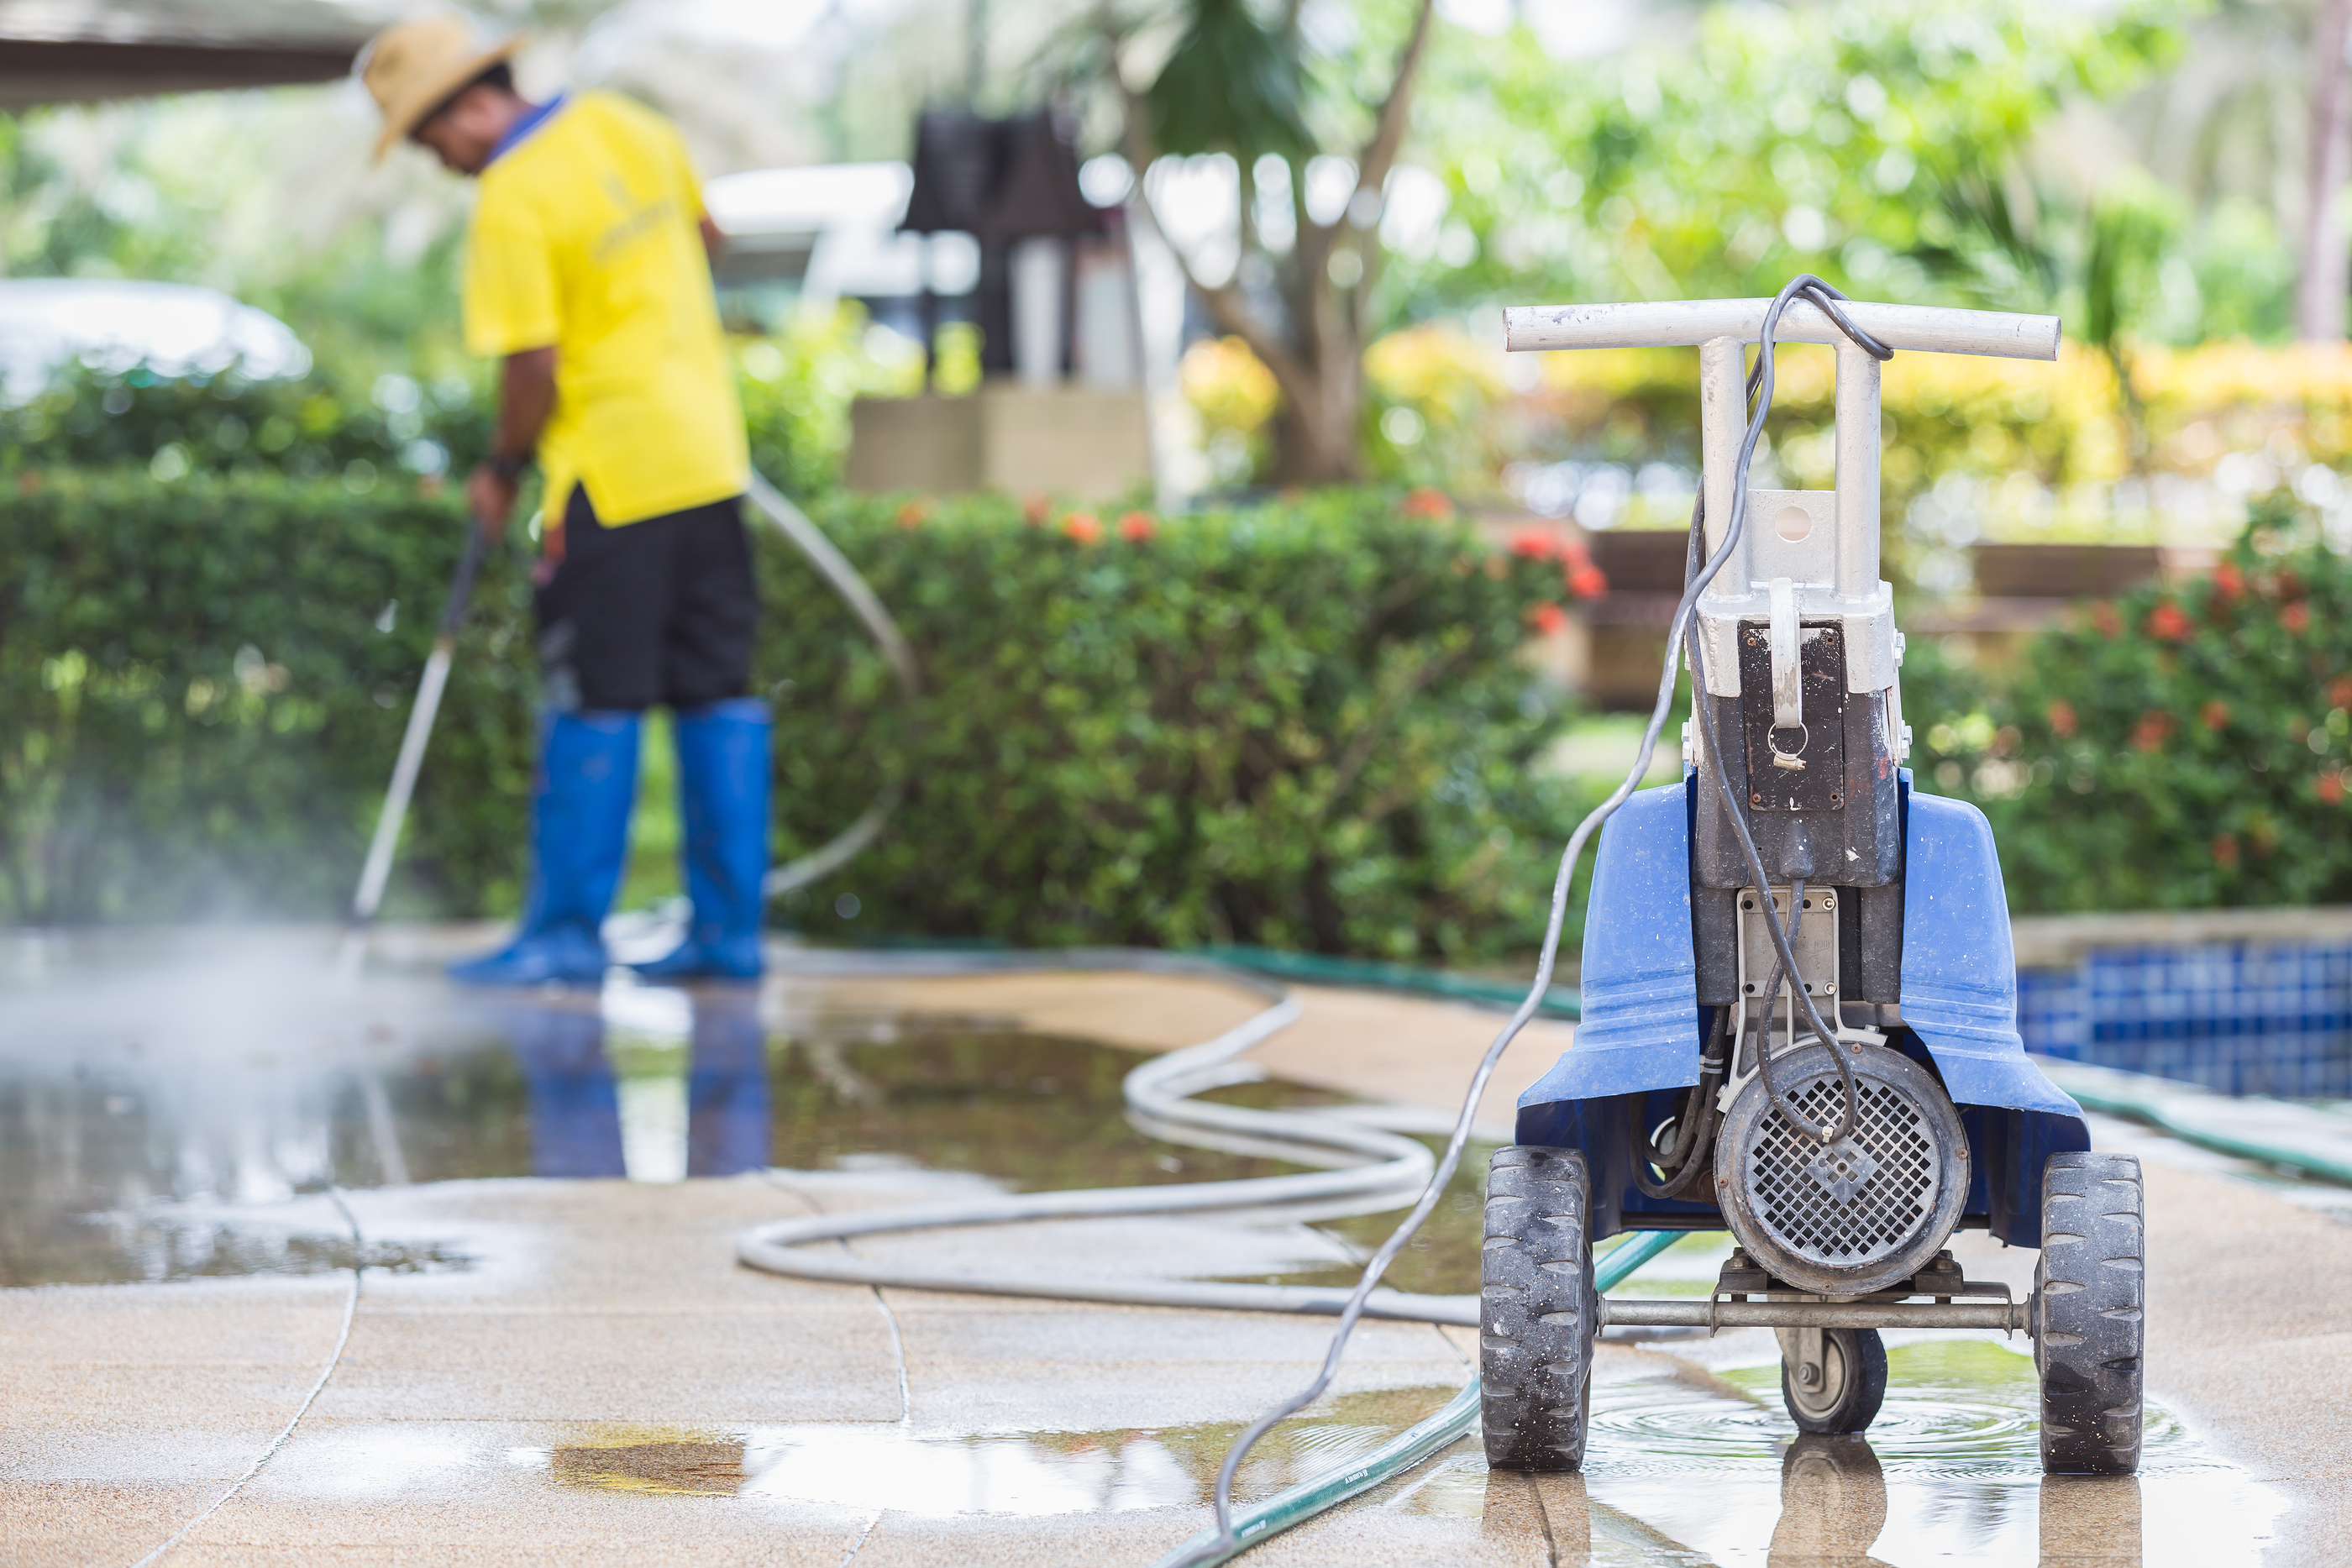 Outdoor Floor Cleaning With High Pressure Water Jet